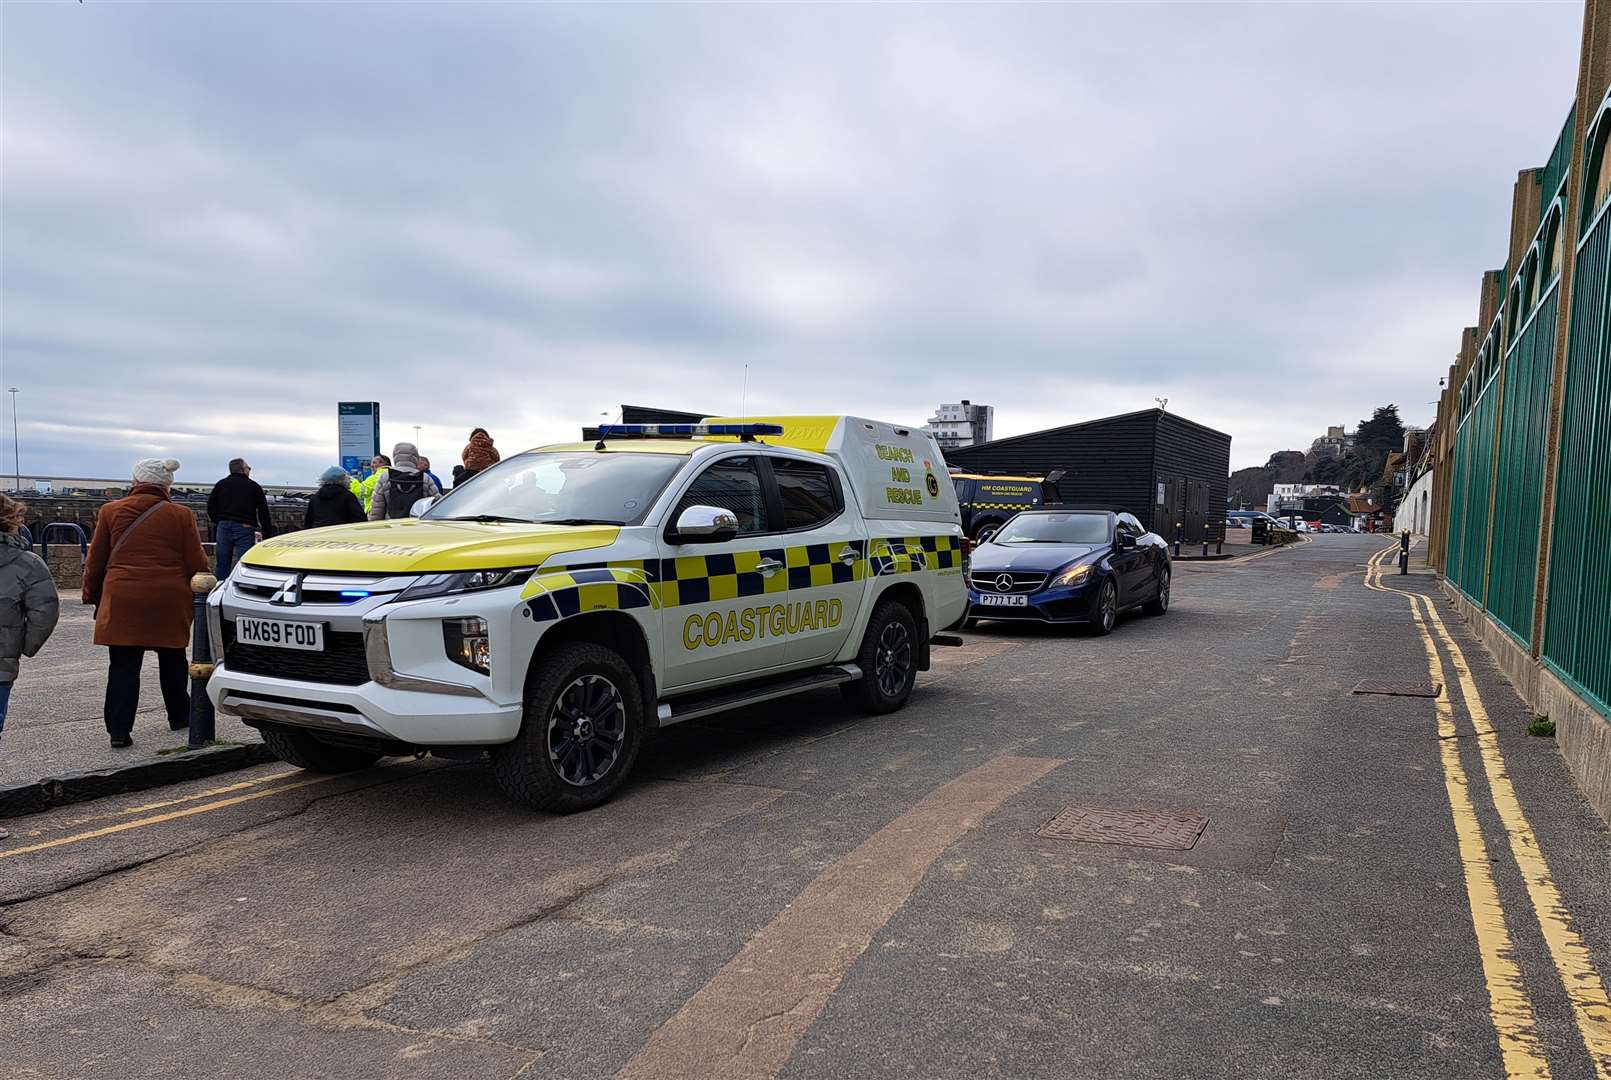 Coastguard had to rescue a woman and a dog stuck in the mud at Folkestone Harbour